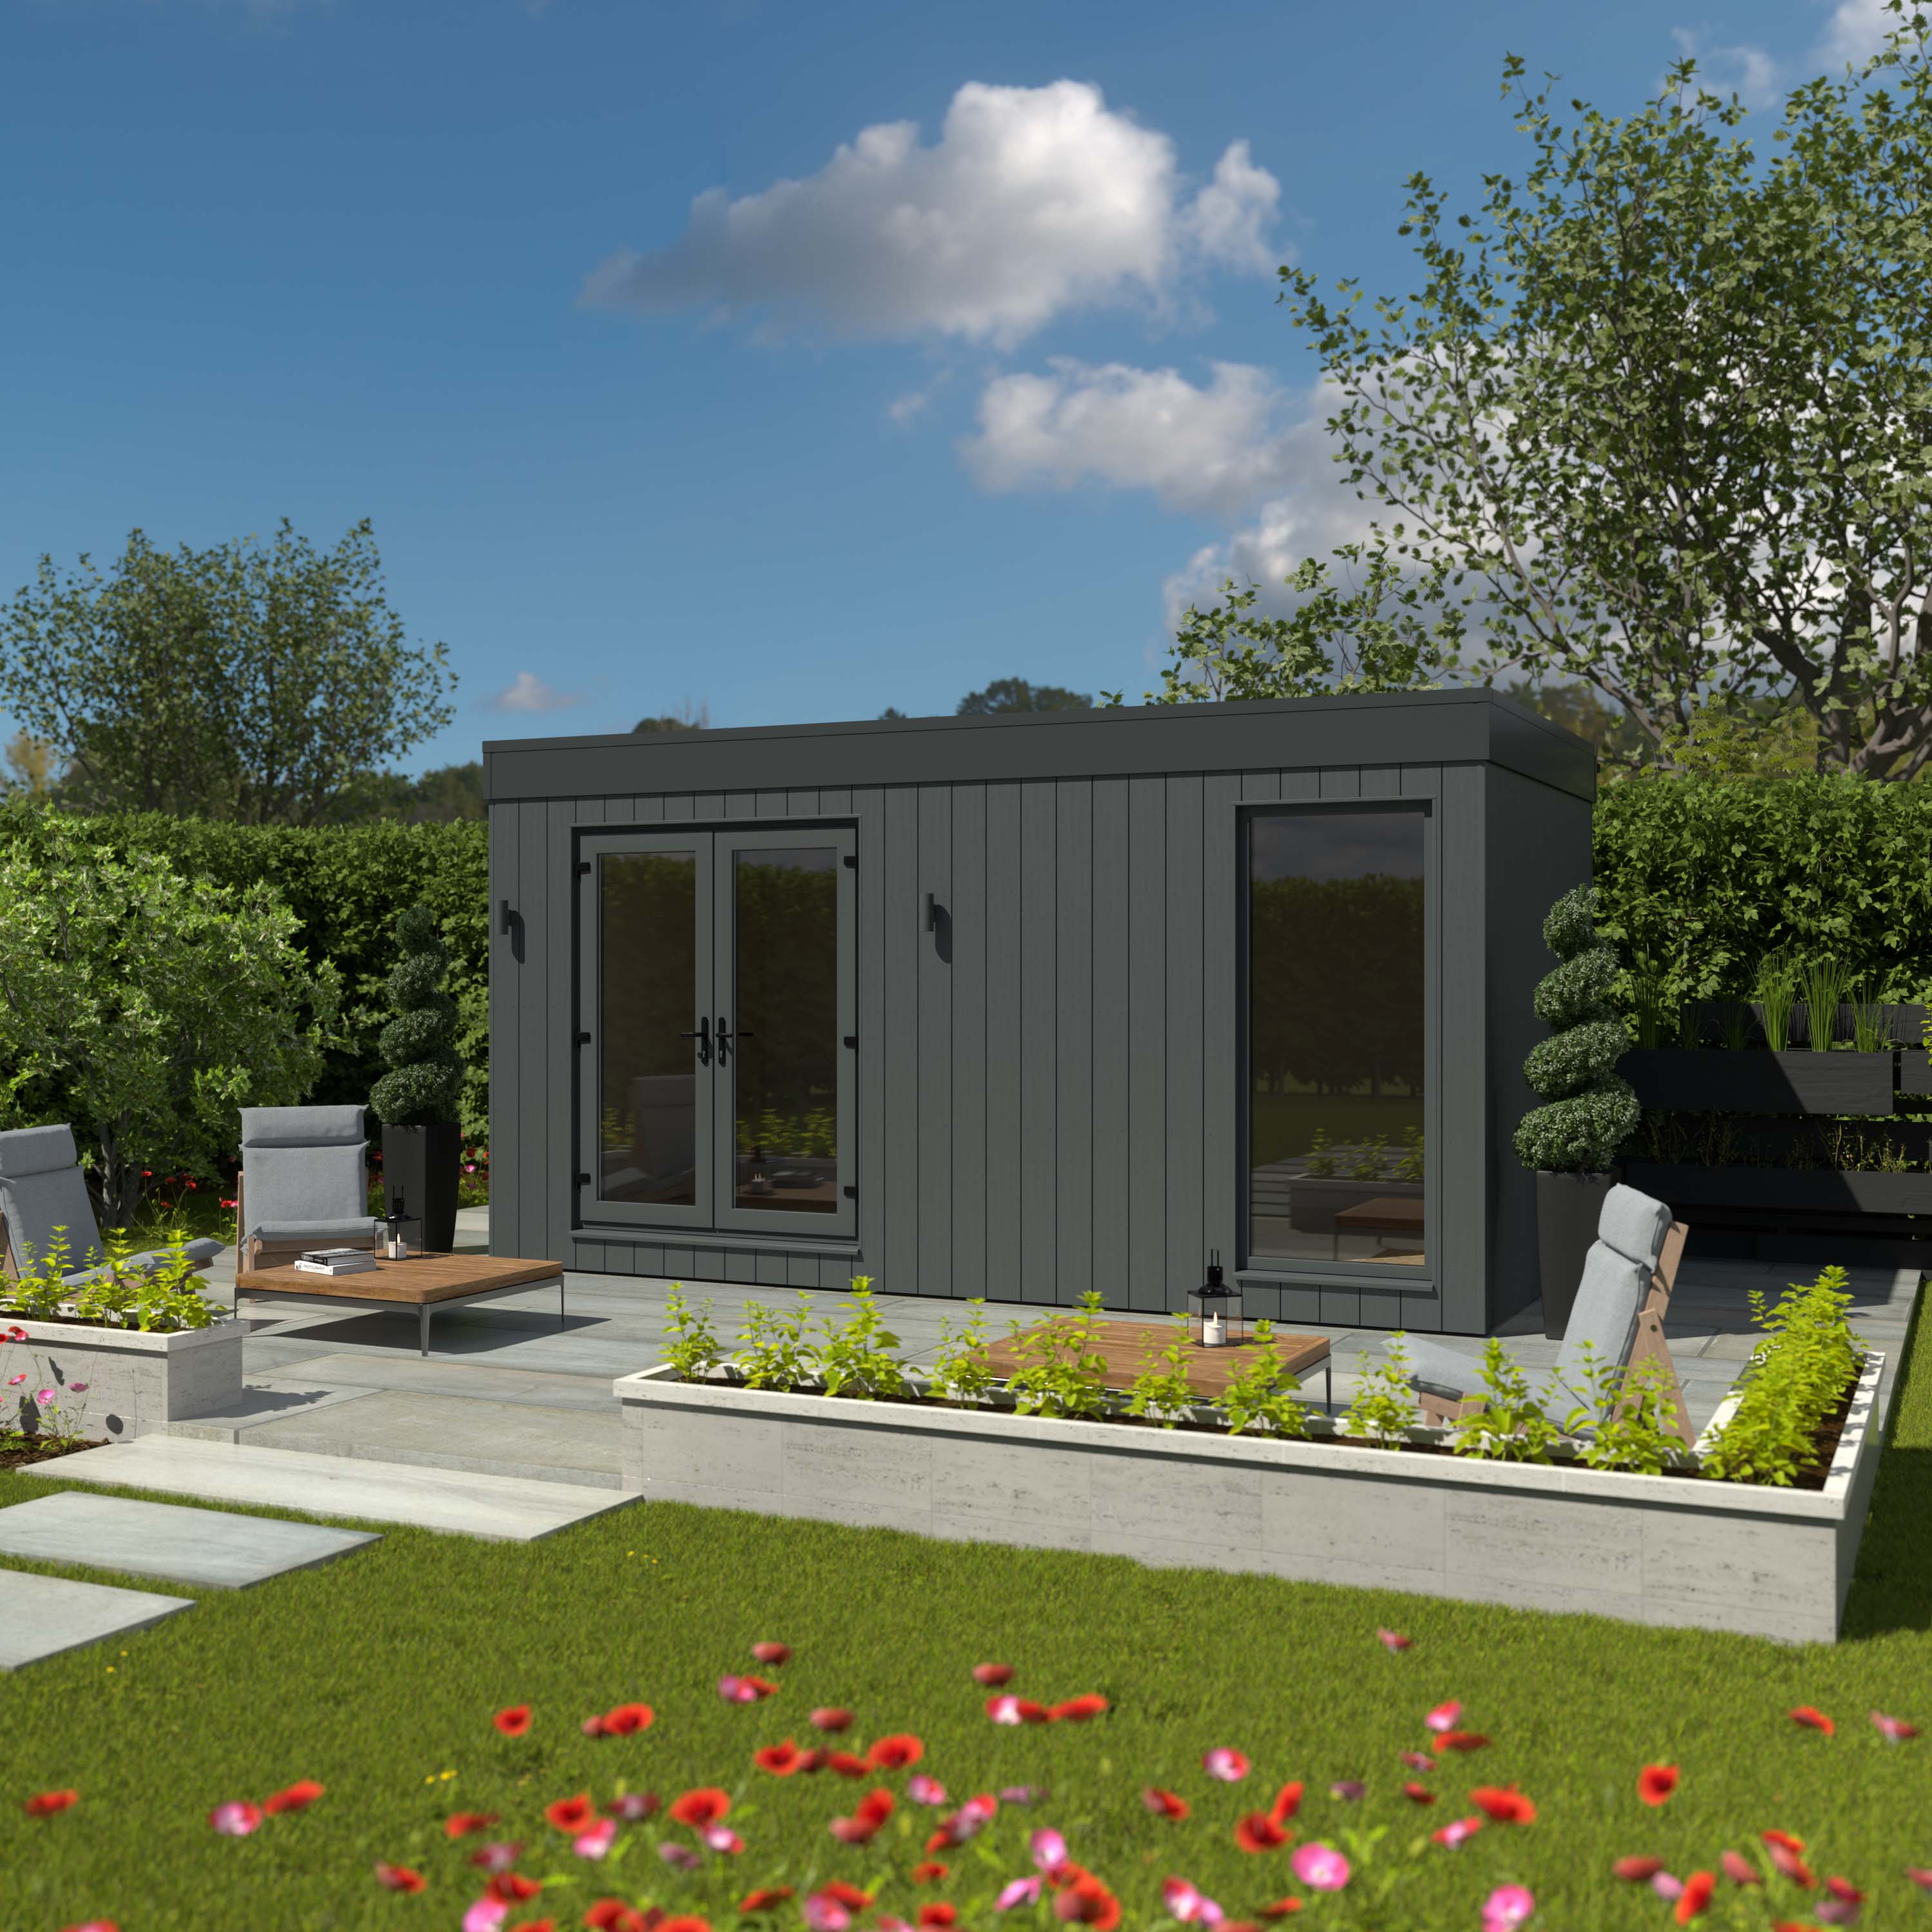 Image of Kyube Plus 5.2 x 2.7m Premium Composite Vertically Cladded Garden Room including Installation - Anthracite Grey